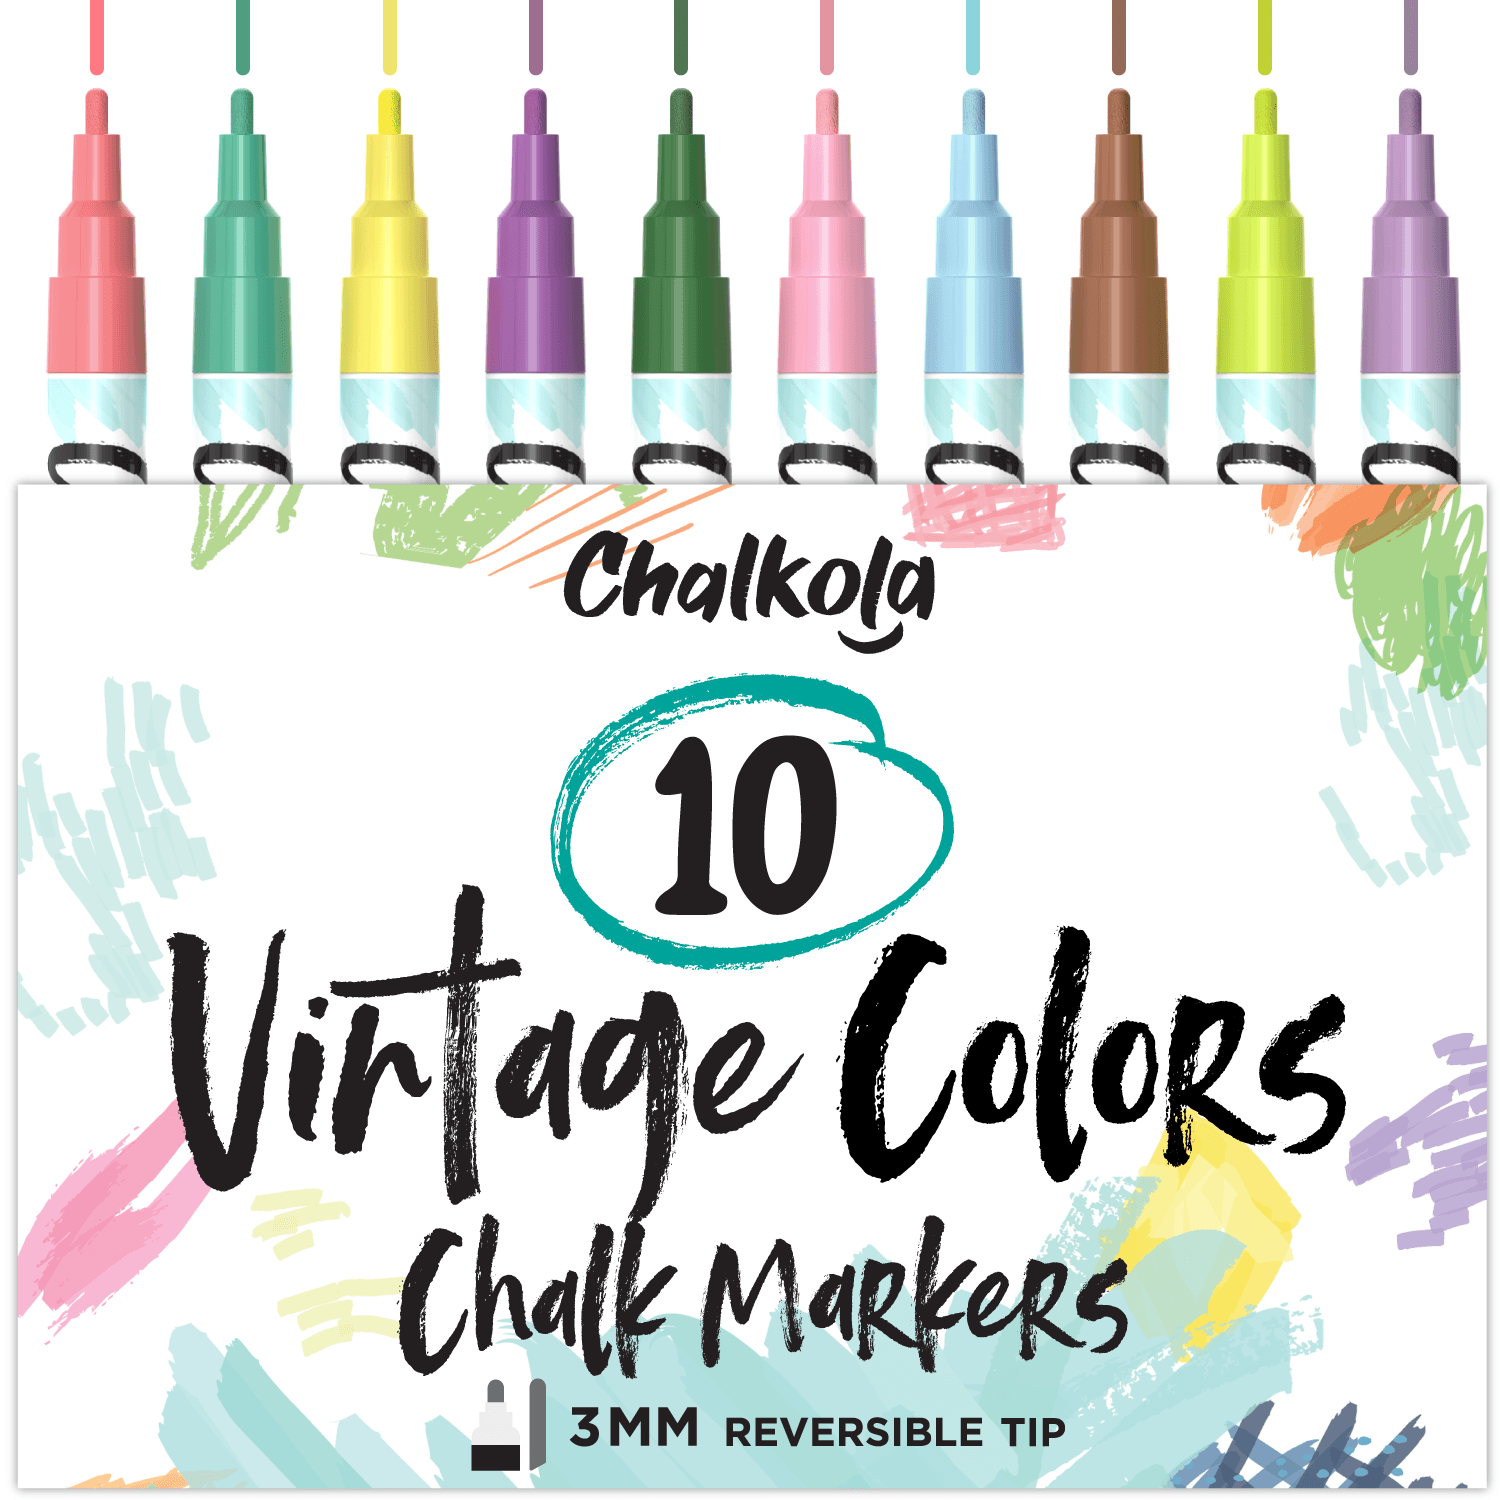 Liquid Chalk Marker Set for Chalkboard Signs (12 Colors, 64 Pieces)